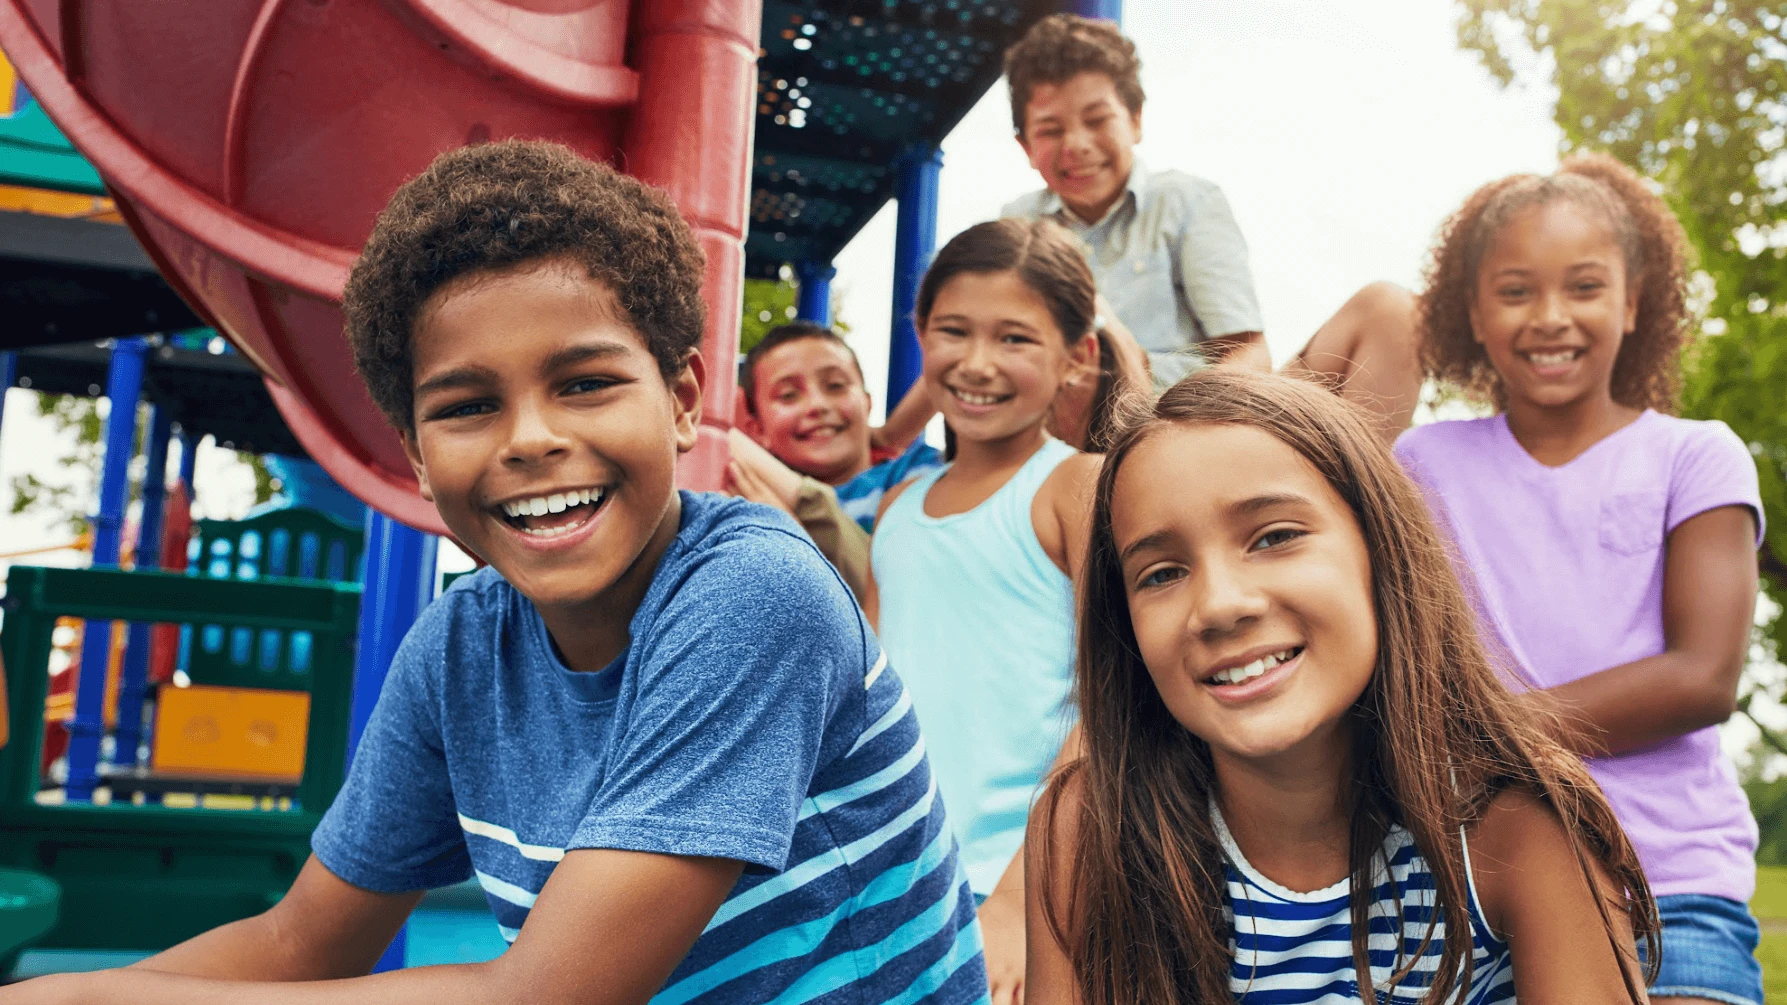 Group of happy children of diverse ethnicities playing on a playground, smiling at the camera.